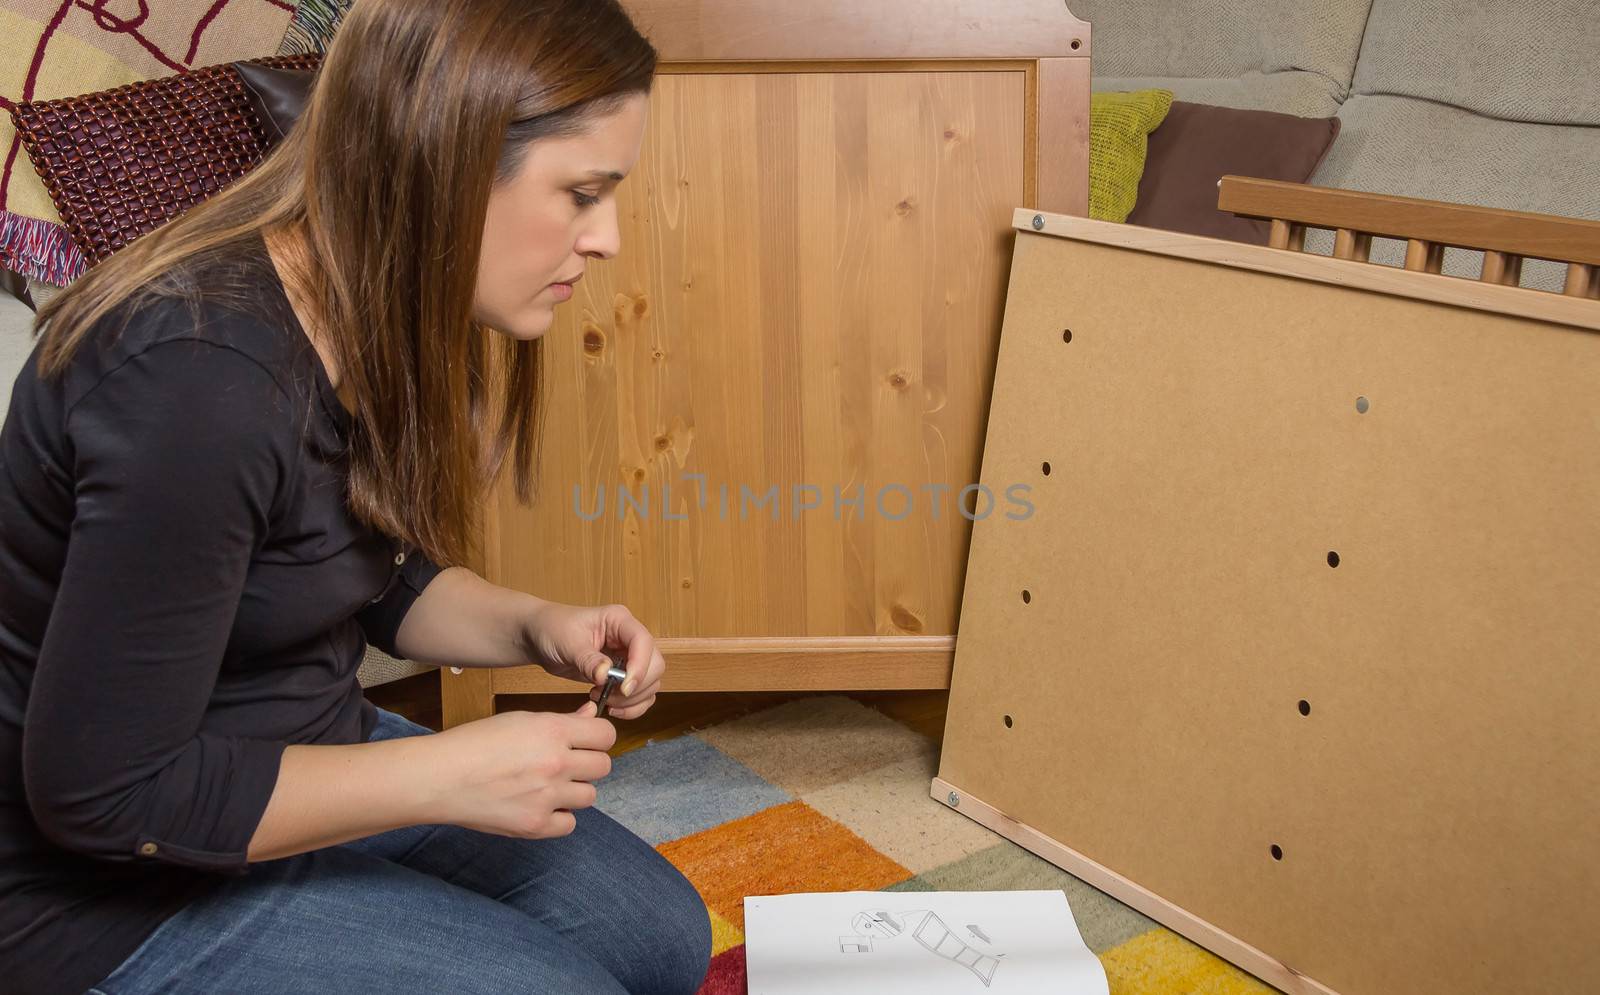 Girl reading instructions to assemble furniture by doble.d